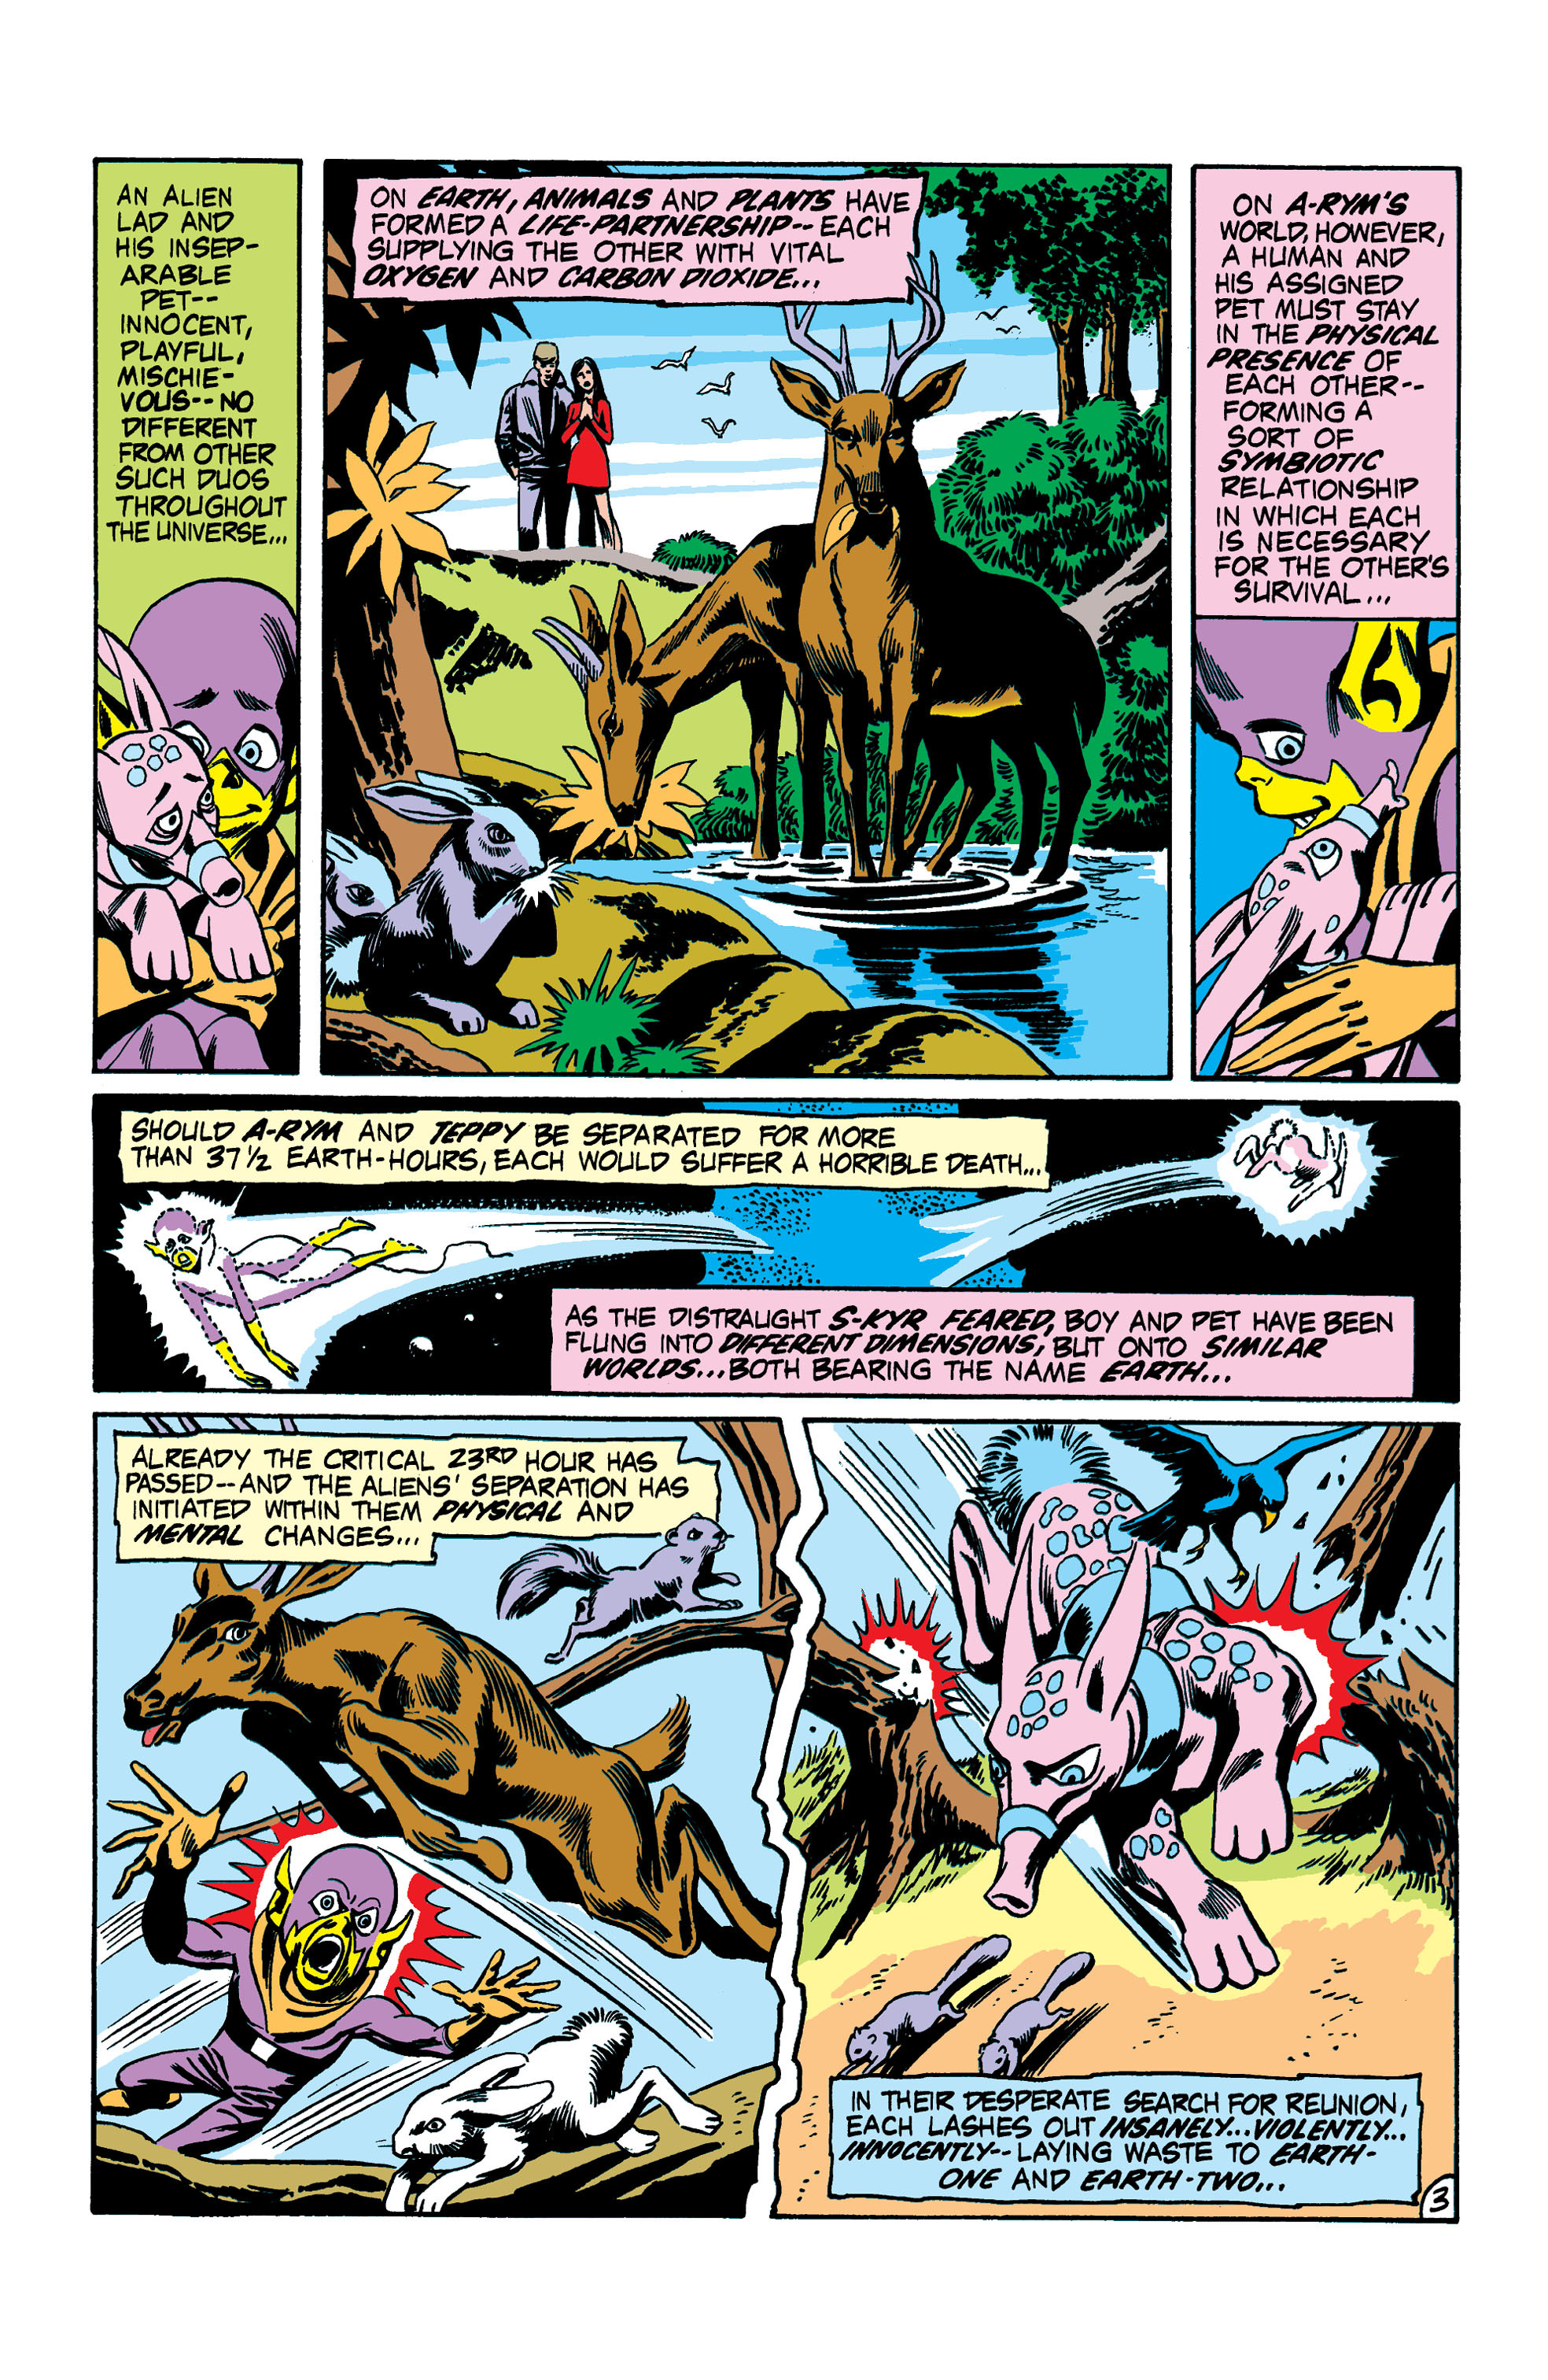 Crisis on Multiple Earths Omnibus: Chapter Crisis-on-Multiple-Earths-17 - Page 4